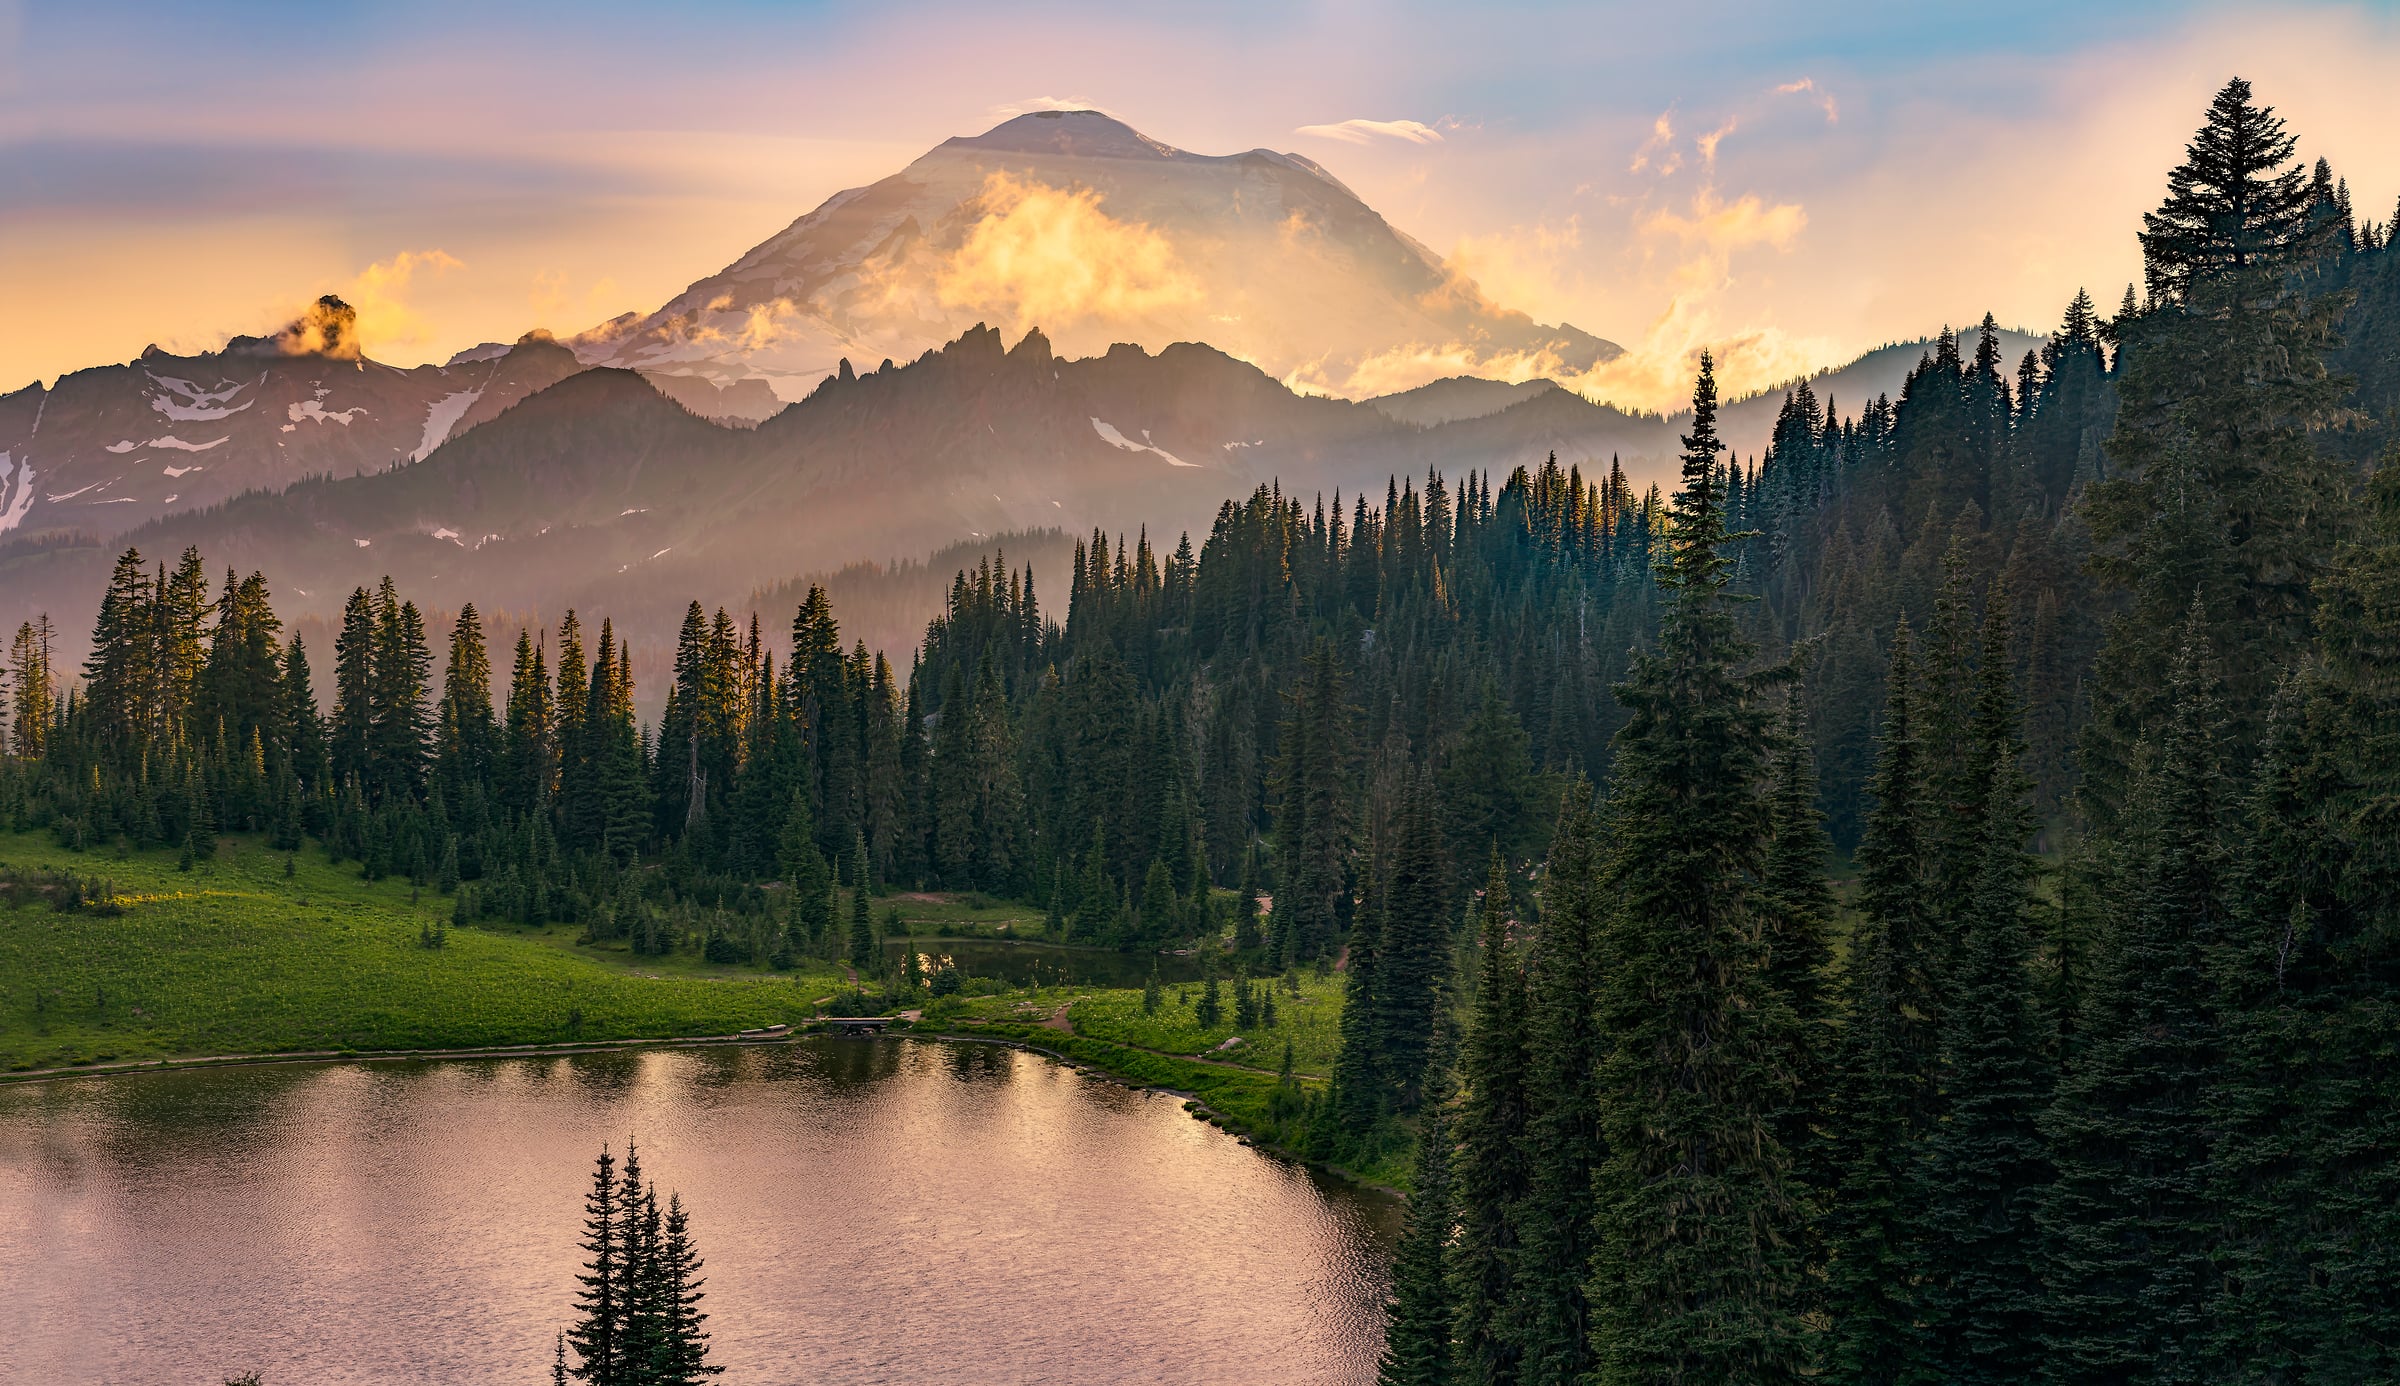 349 megapixels! A very high resolution, large-format VAST photo print of Mt Rainier at sunset with Tipsoo lake in the foreground; landscape photograph created by Chris Blake in Tipsoo Lake, Mount Rainier National Park, Washington.